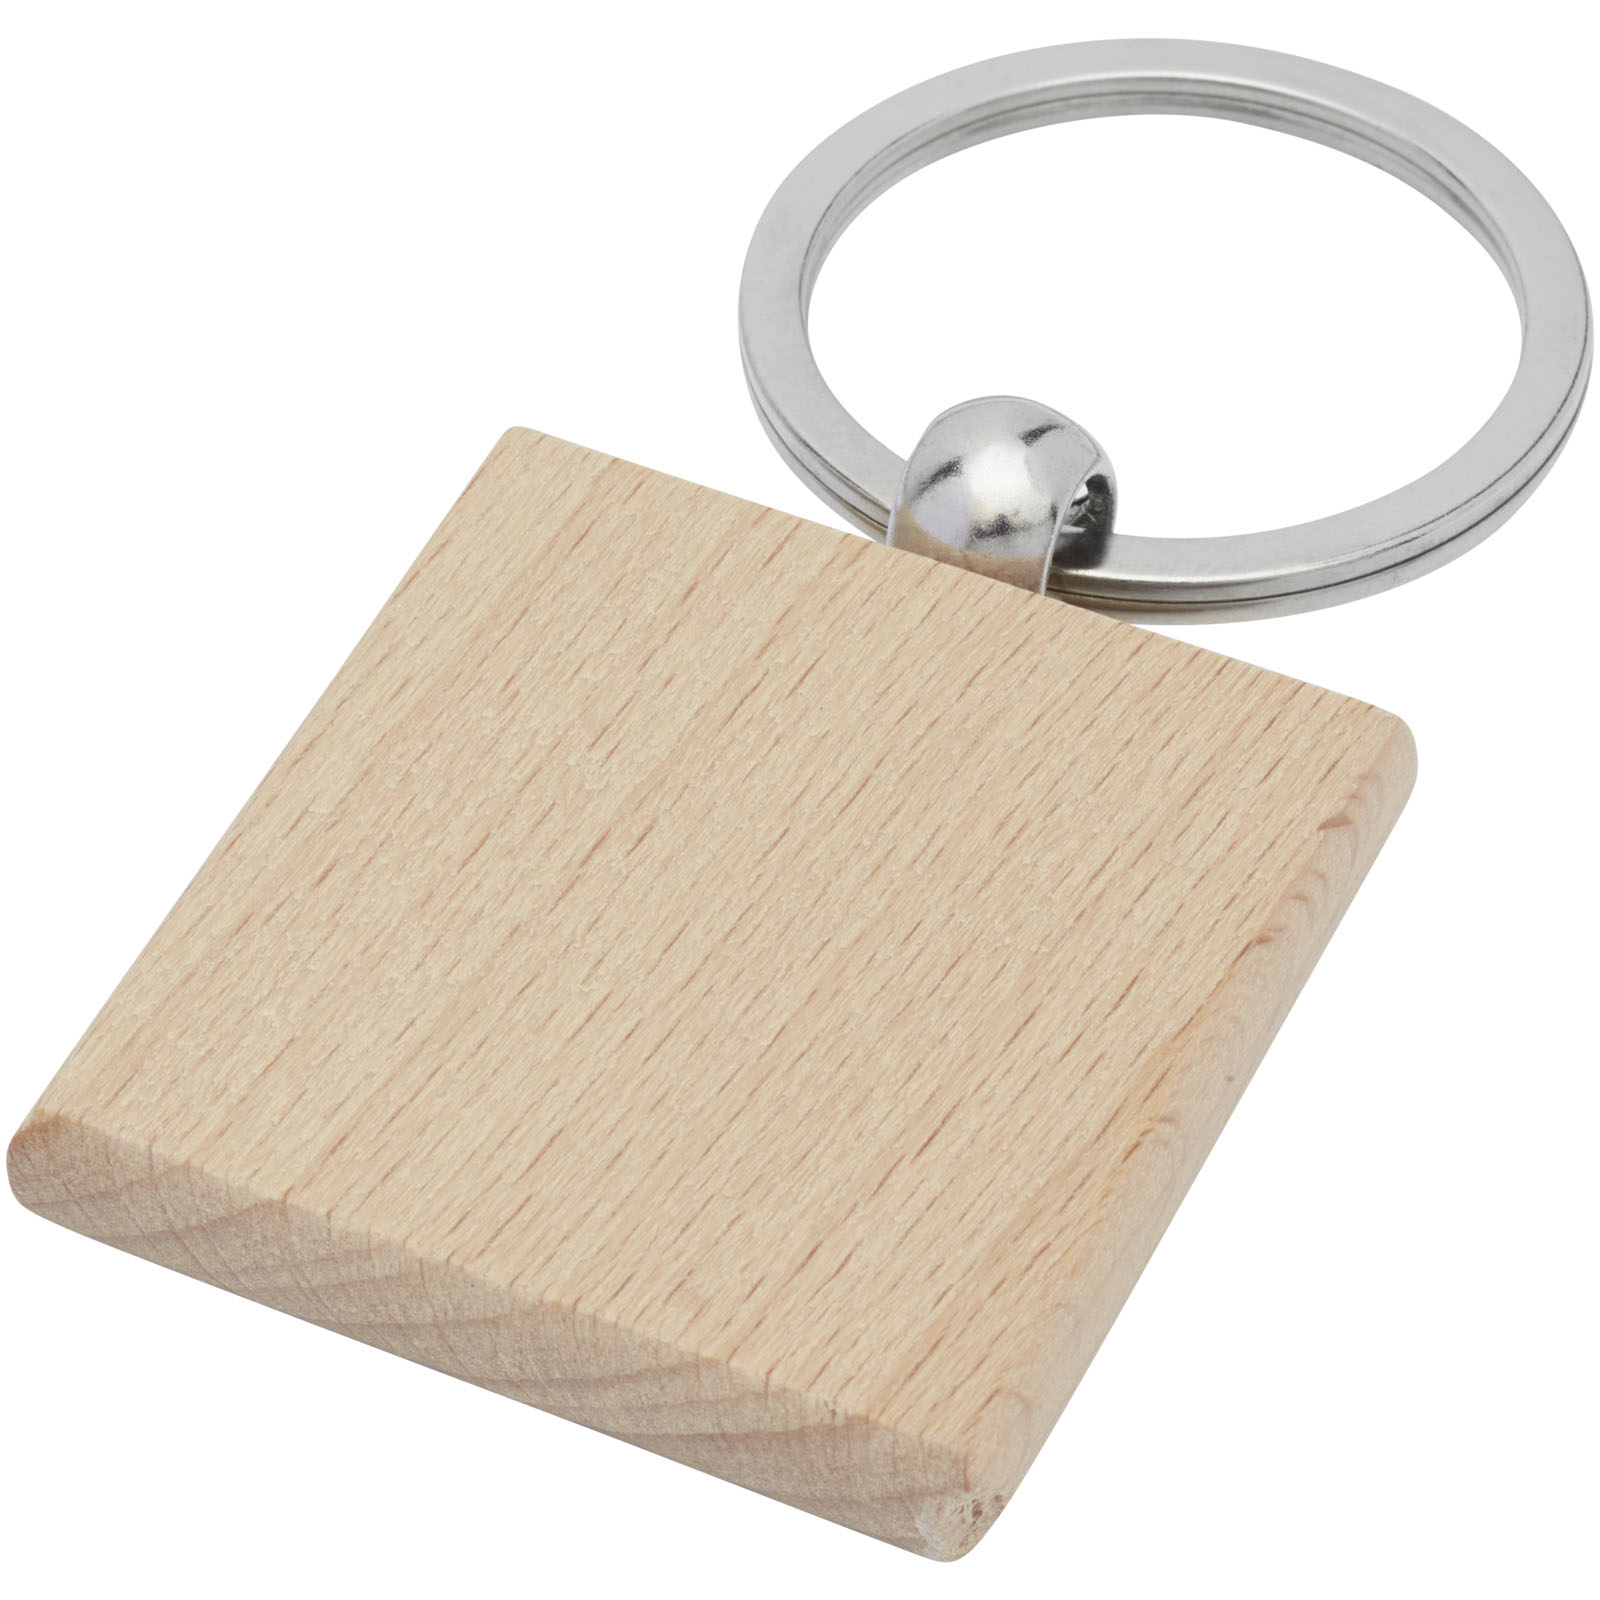 Advertising Keychains & Keyrings - Gioia beech wood squared keychain - 0